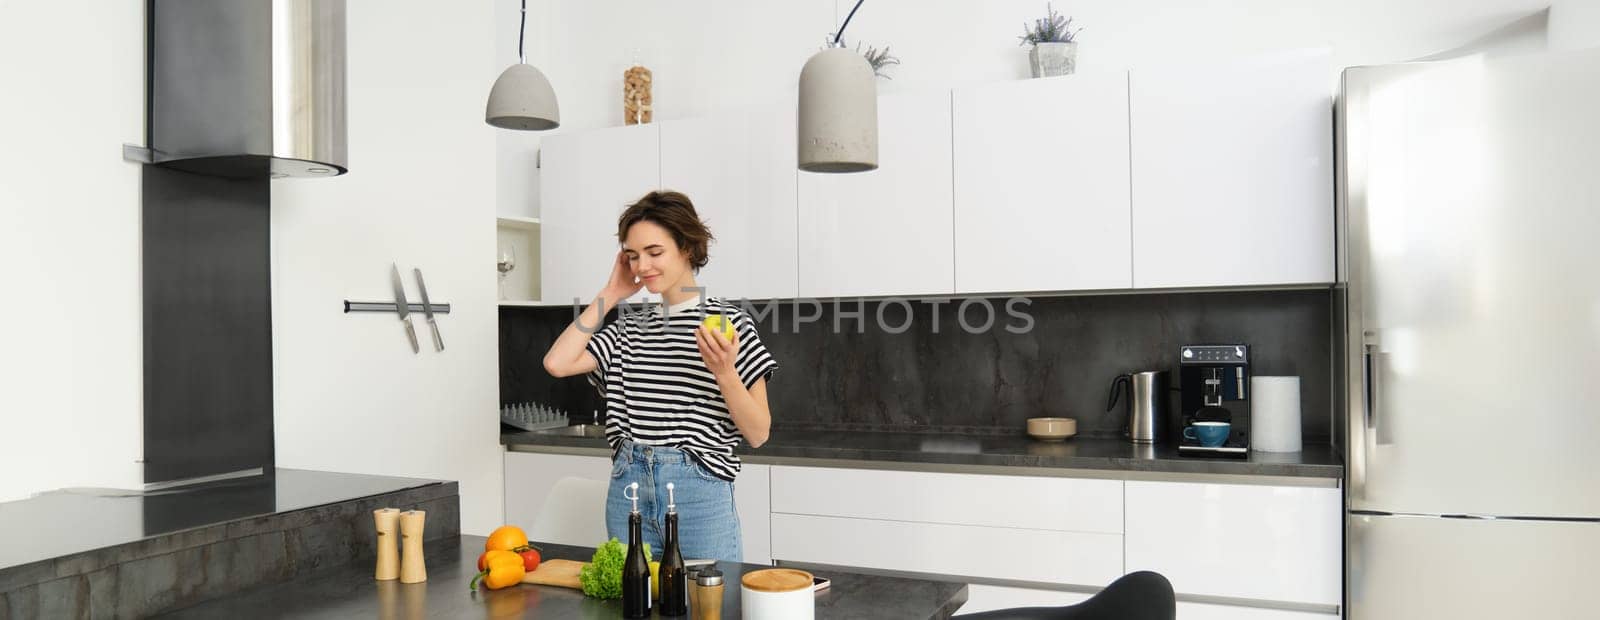 Portrait of young woman cooking salad. Cute girl vegan chopping vegetables on kitchen counter, preparing food.